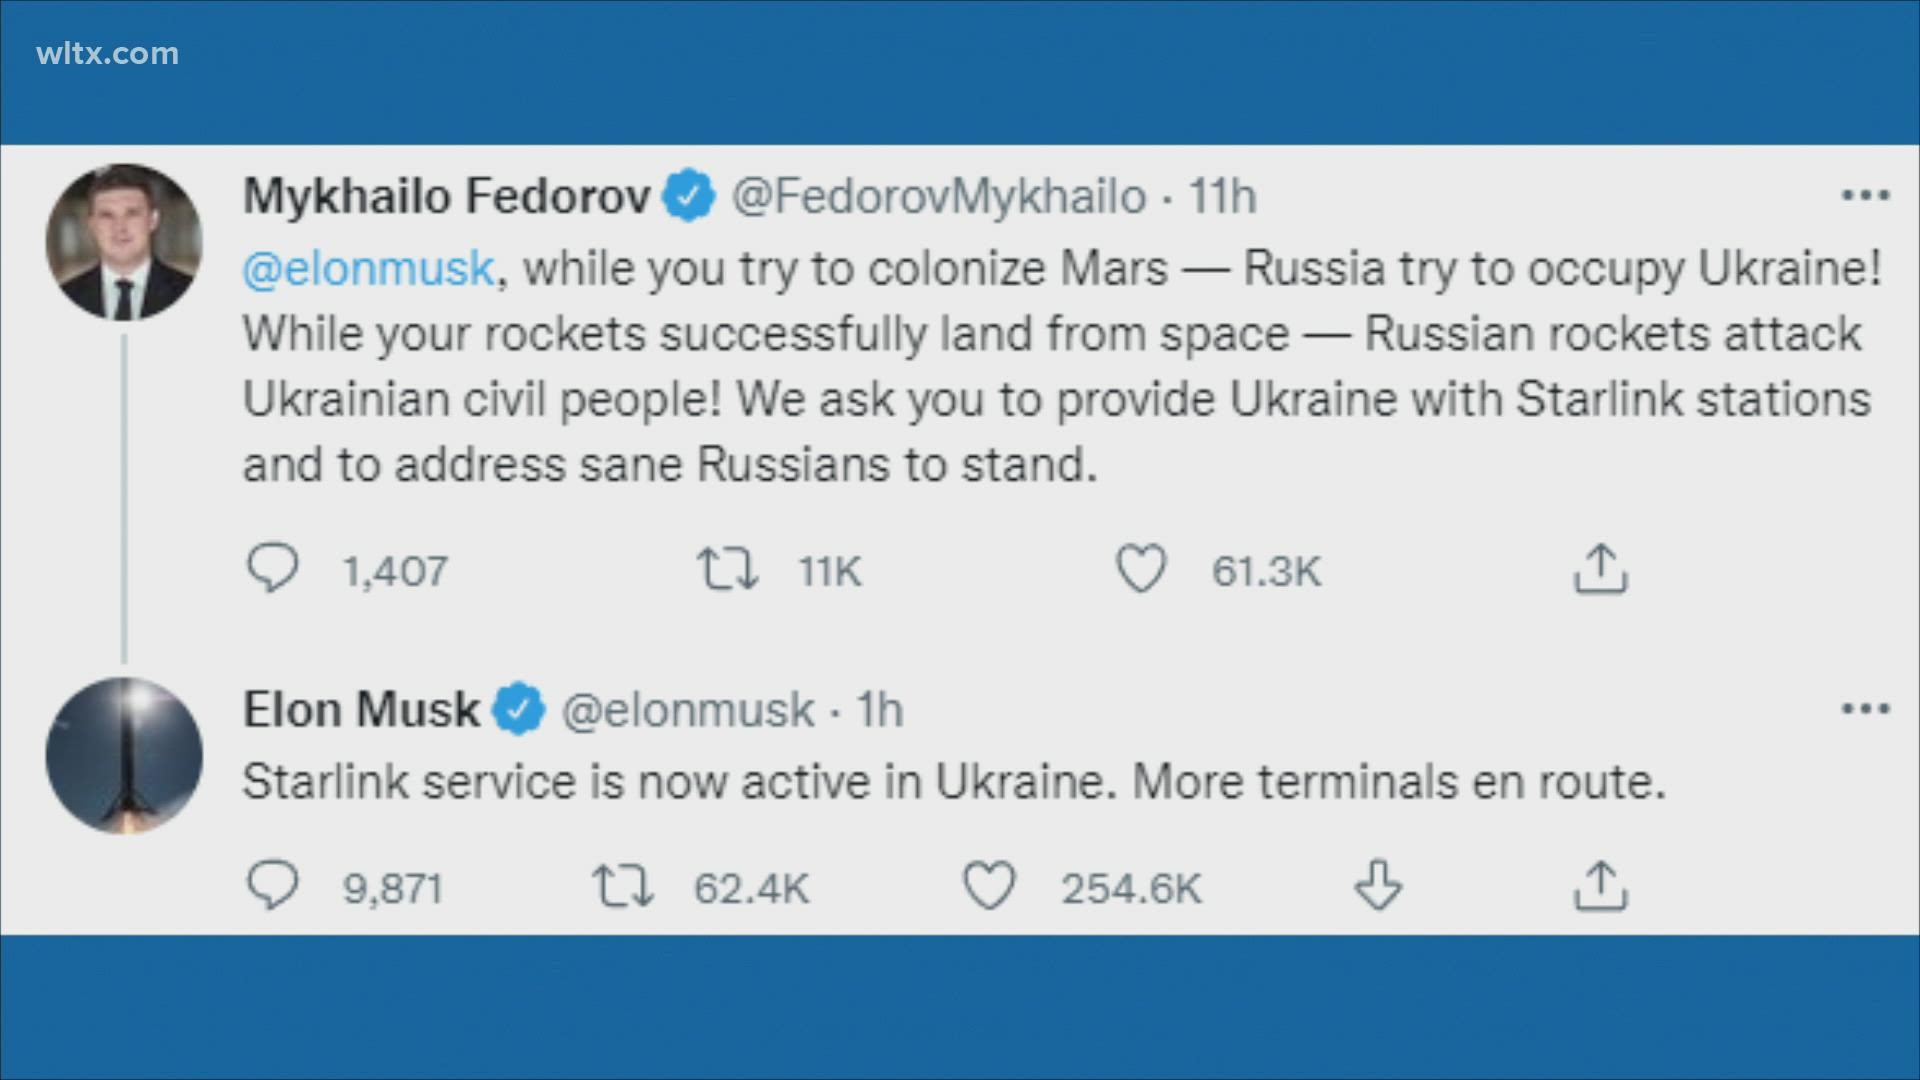 The move came after a request by Mykhailo Fedorov on Twitter.